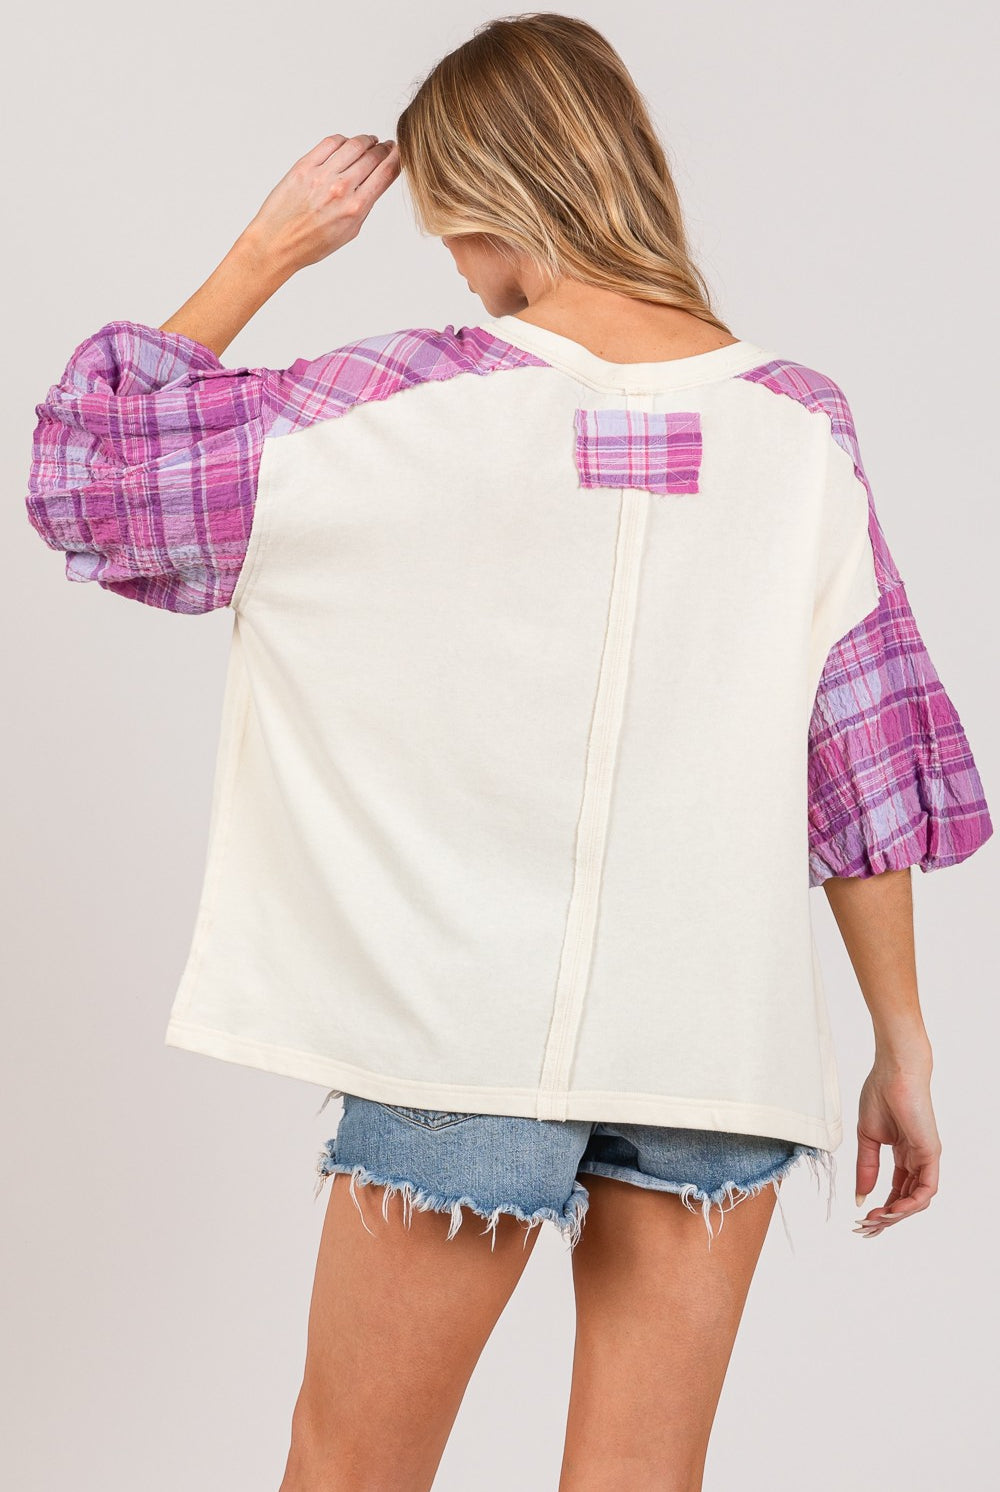 Woman in a casual peace sign top with plaid sleeves, perfect for a stylish contrast look.